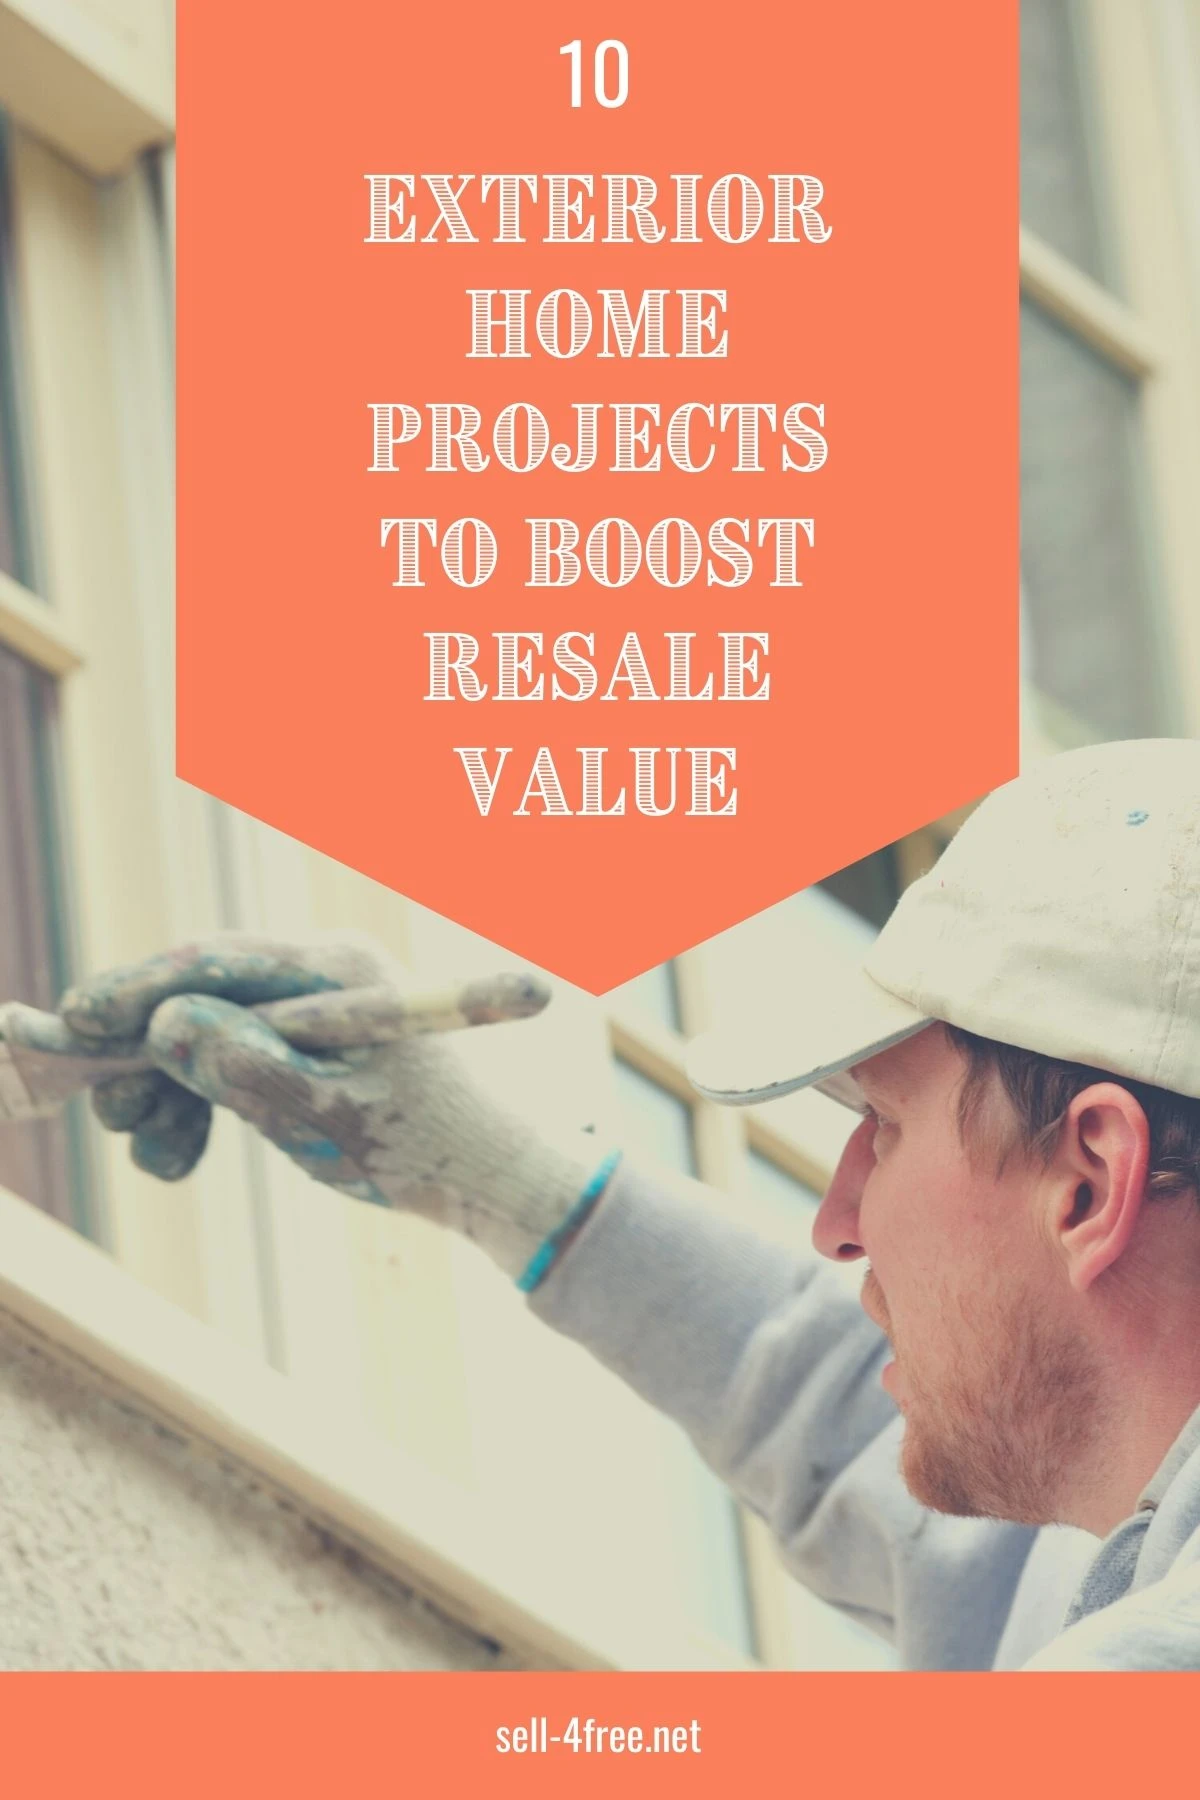 5 Exterior Home Projects to Boost Resale Value